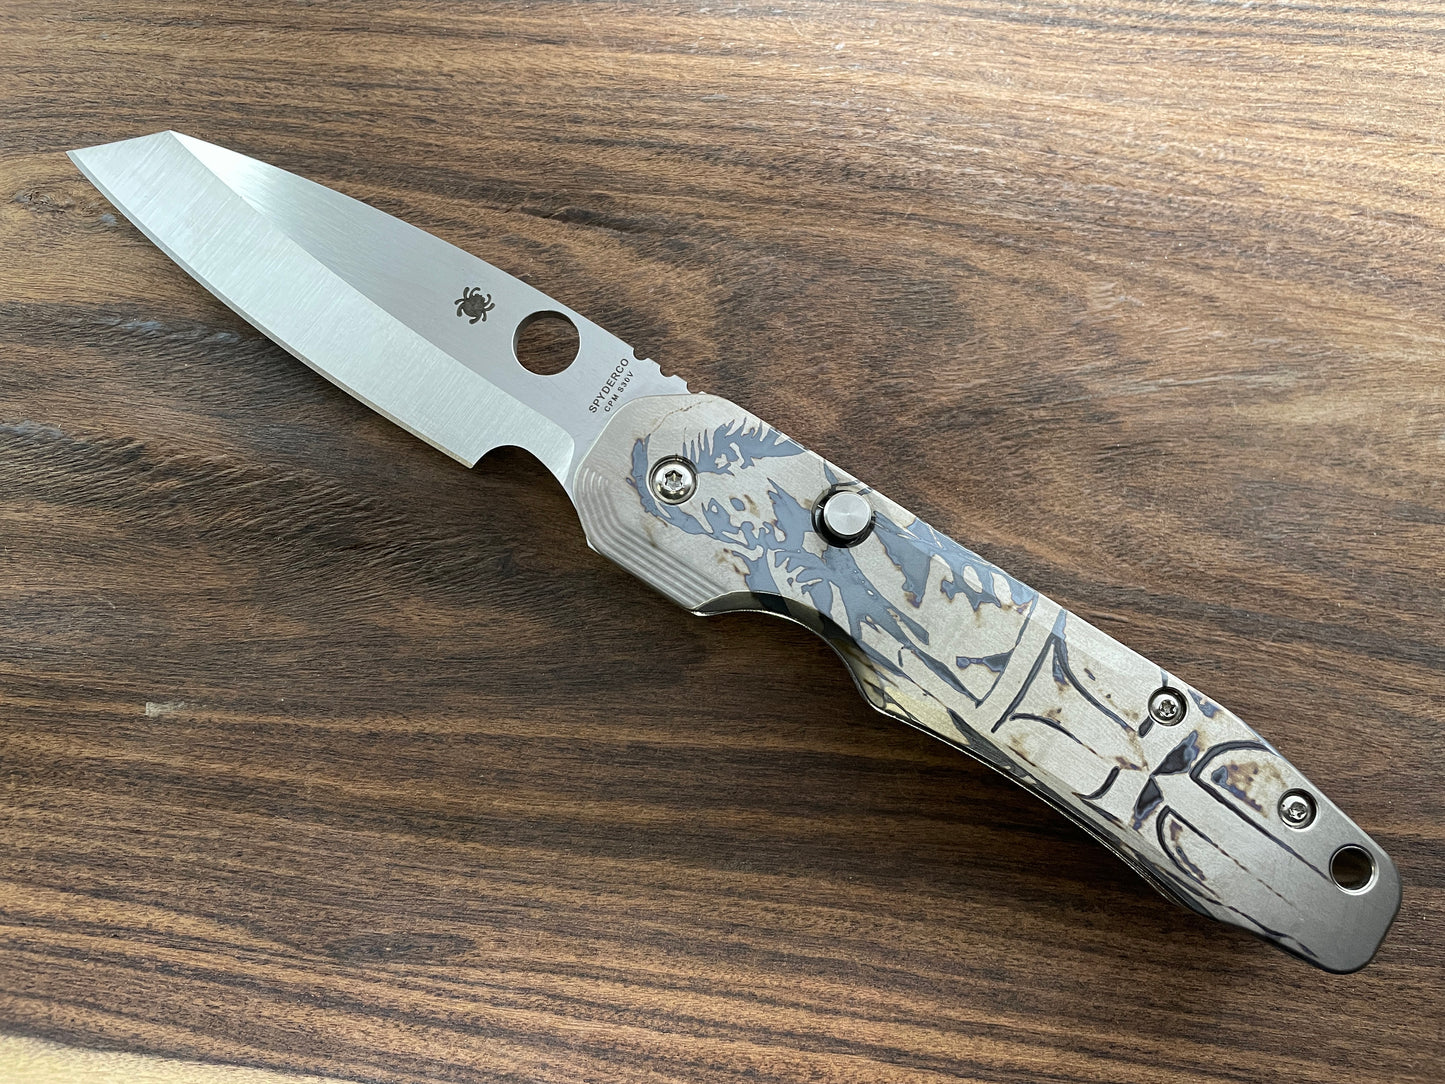 St. MICHAEL the Archangel Titanium Scales for Spyderco SMOCK